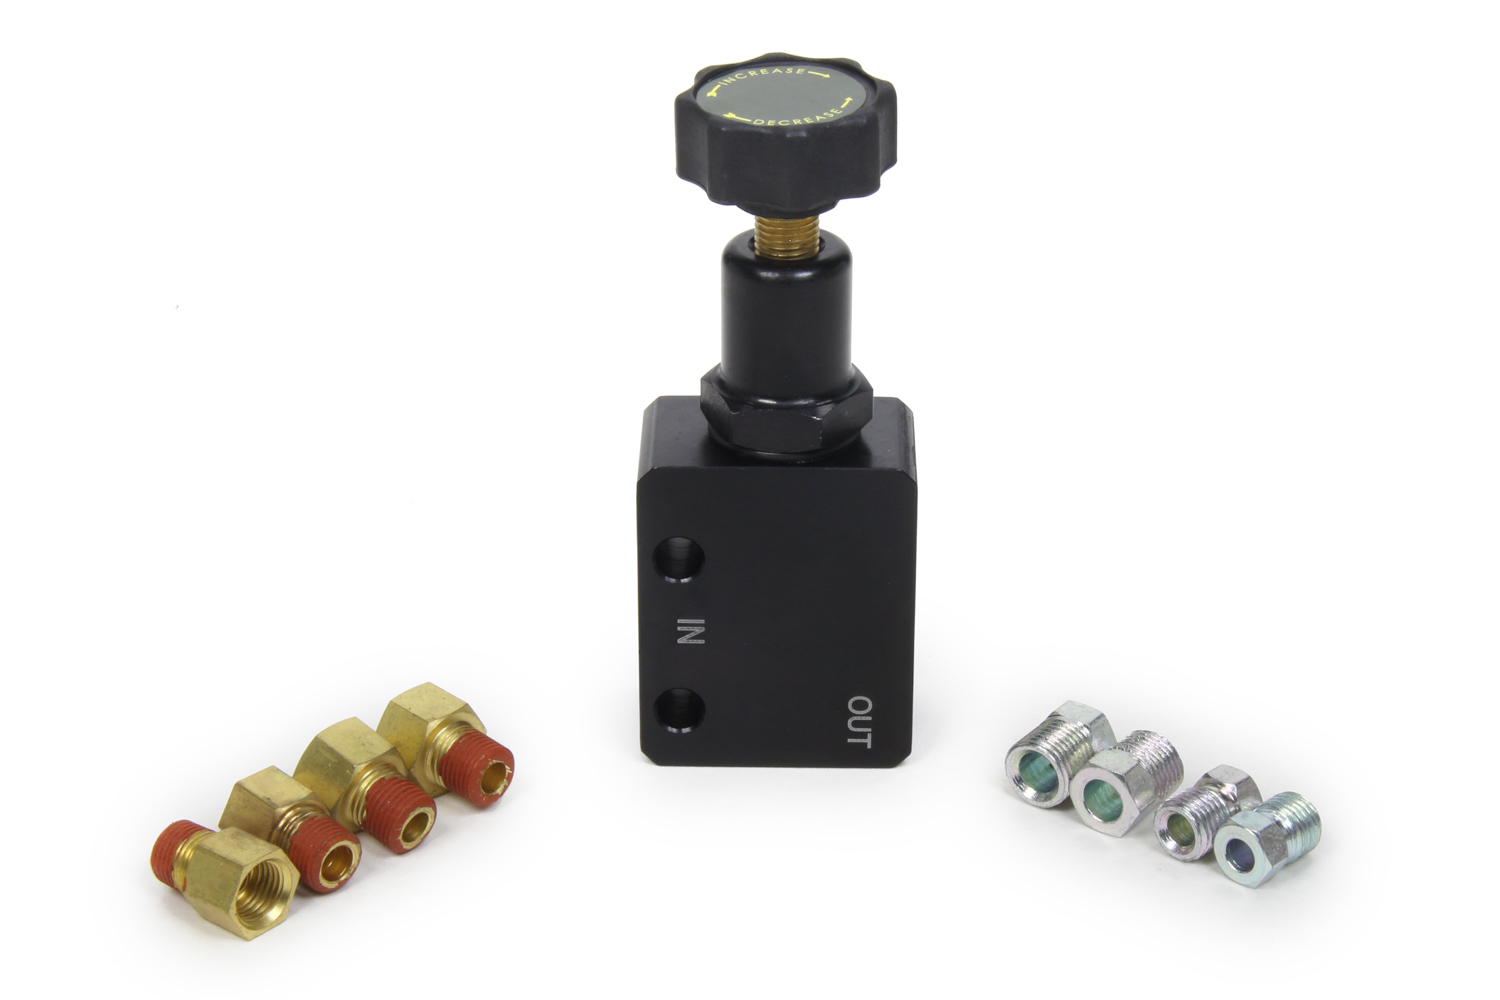 Right Stuff PV01 - Proportioning Valve, 1/8 in NPT Female Inlet, 1/8 in NPT Female Outlet, Knob Type, Aluminum, Black Anodized, Each